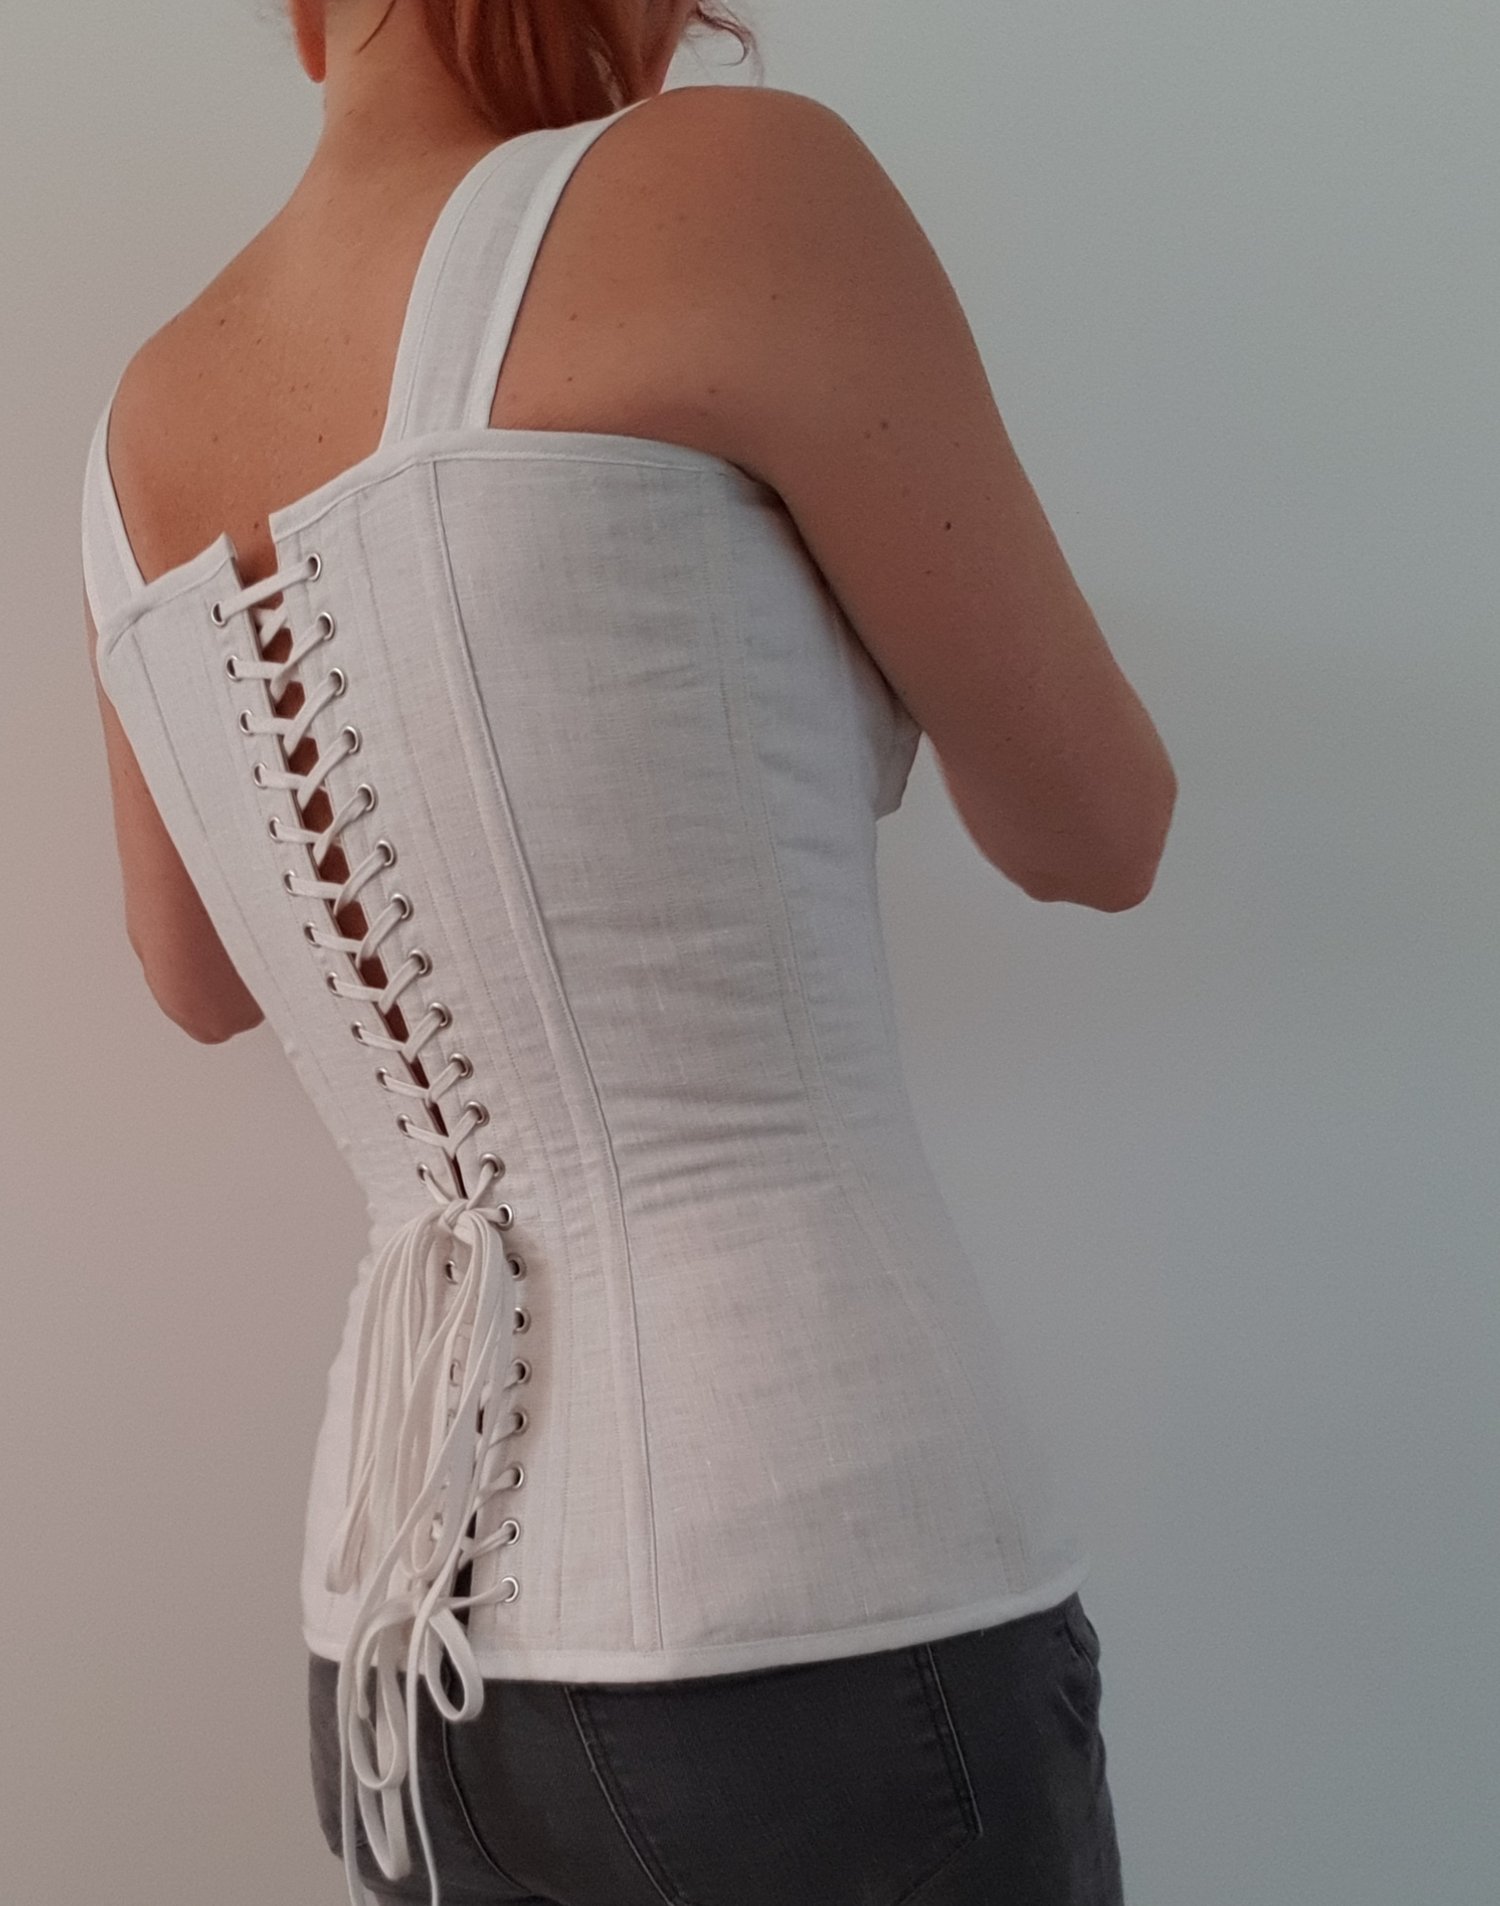 200 years of corset design reimagined - a collection of 10 patterns from  1715-1915